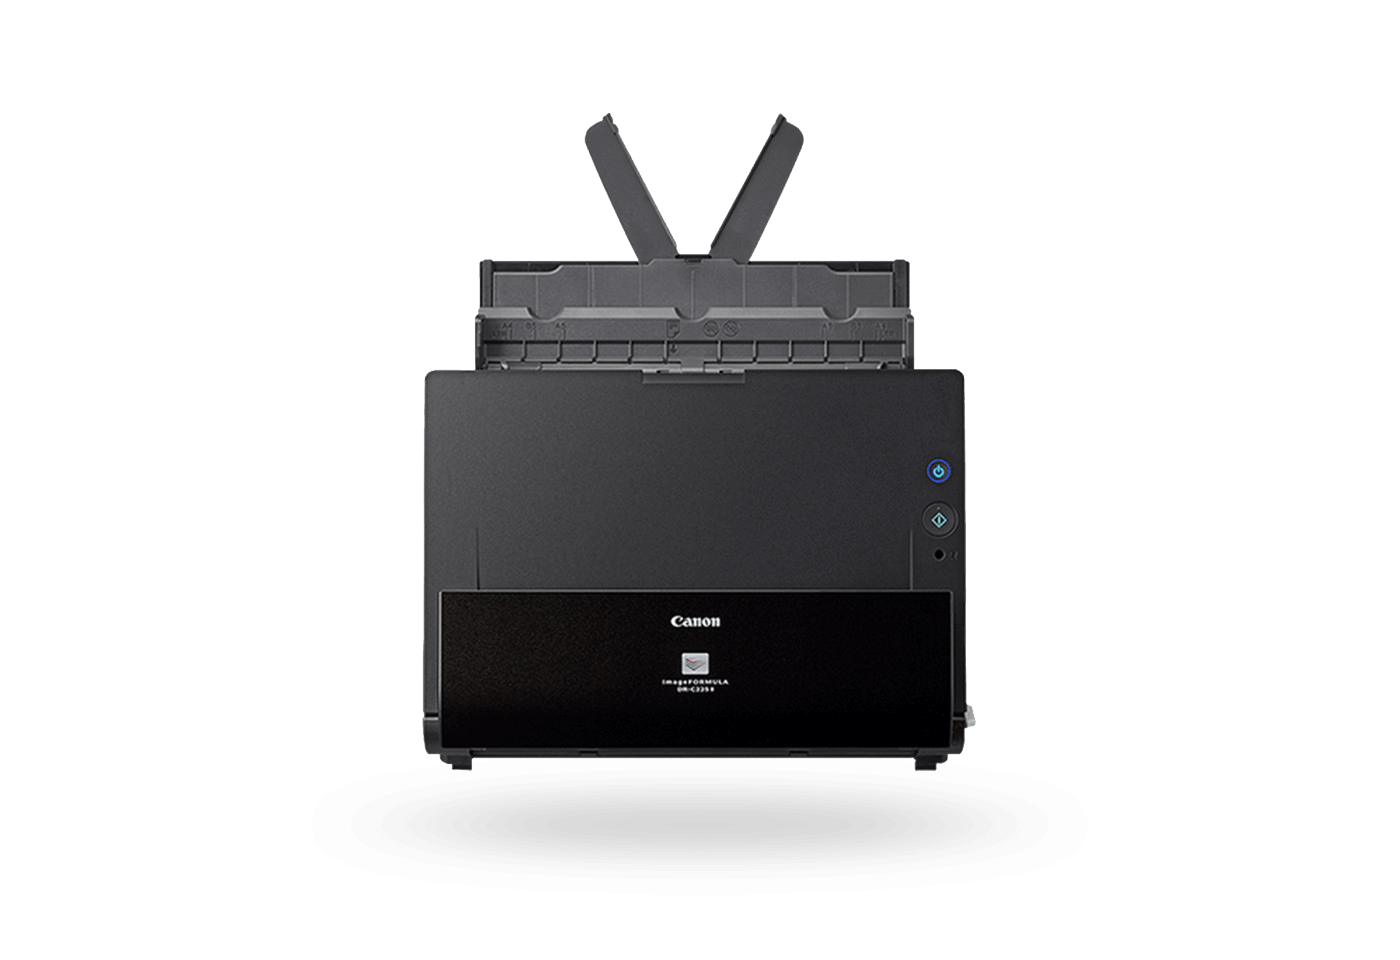 Product image of the Canon imageFORMULA DR-C225 II document scanner